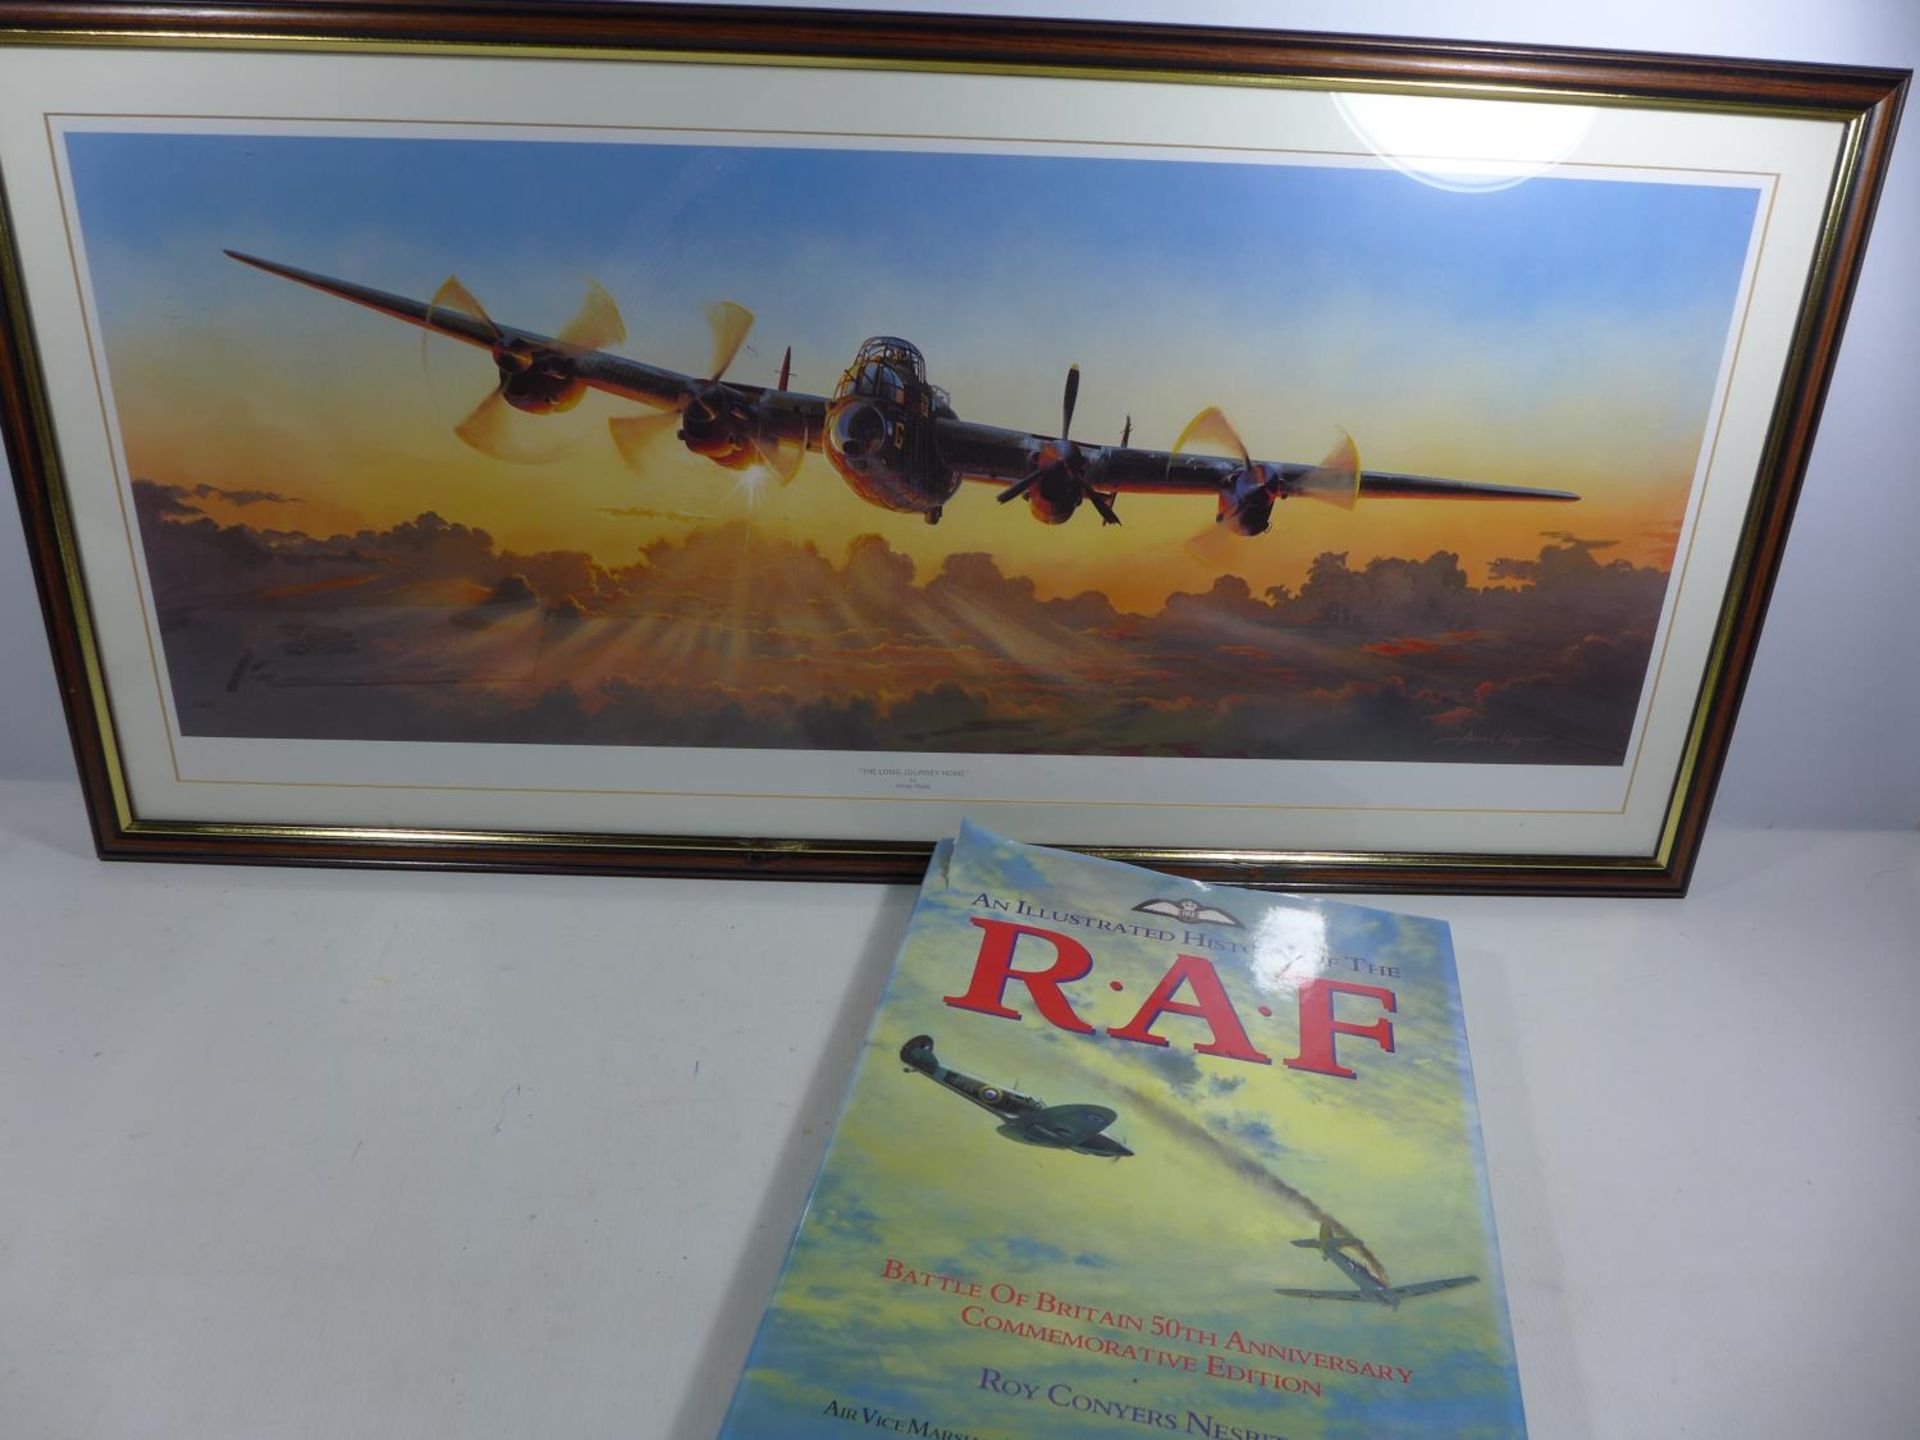 "THE ILLUSTRATED HISTORY OF THE RAF, BATTLE OF BRITAIN 50TH ANNIVERSARY COMMEMORATIVE EDITION" AND A